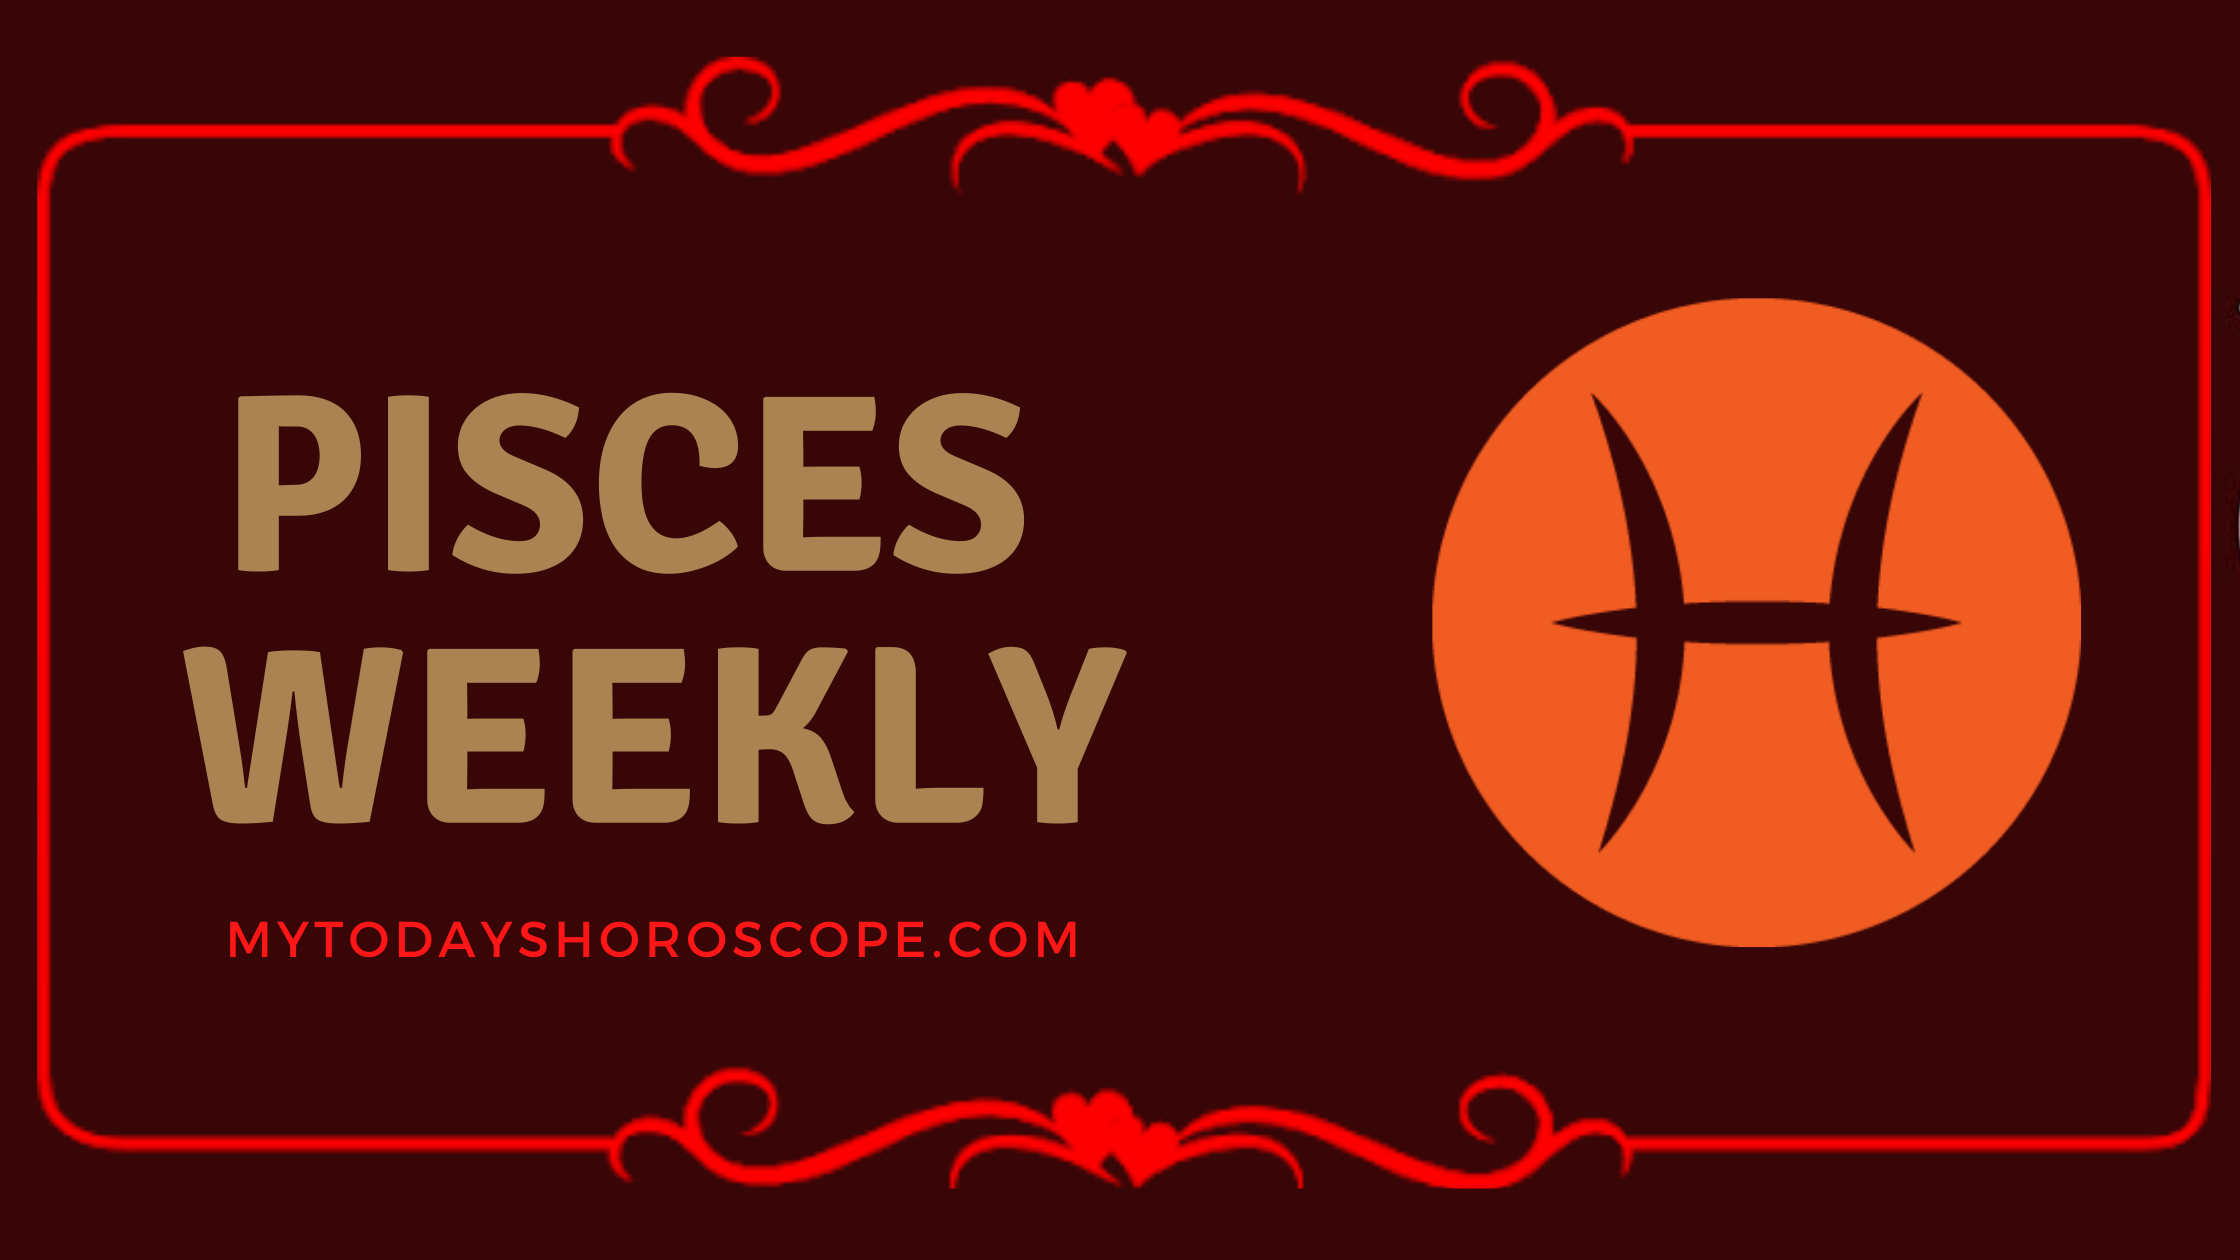 Pisces Weekly Horoscope for Love, Work and Well-being